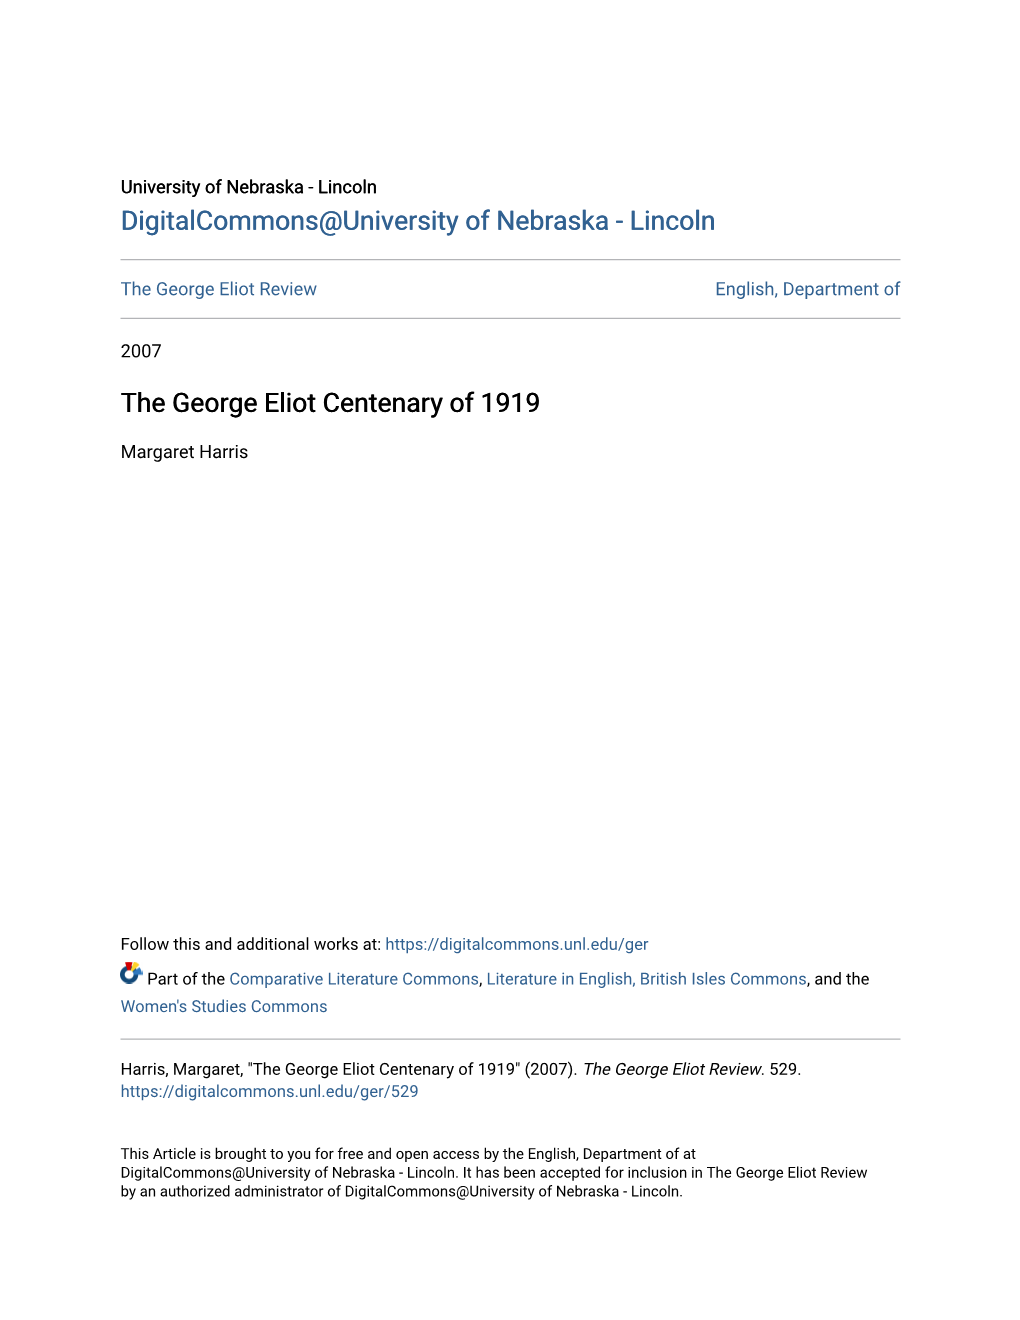 The George Eliot Centenary of 1919